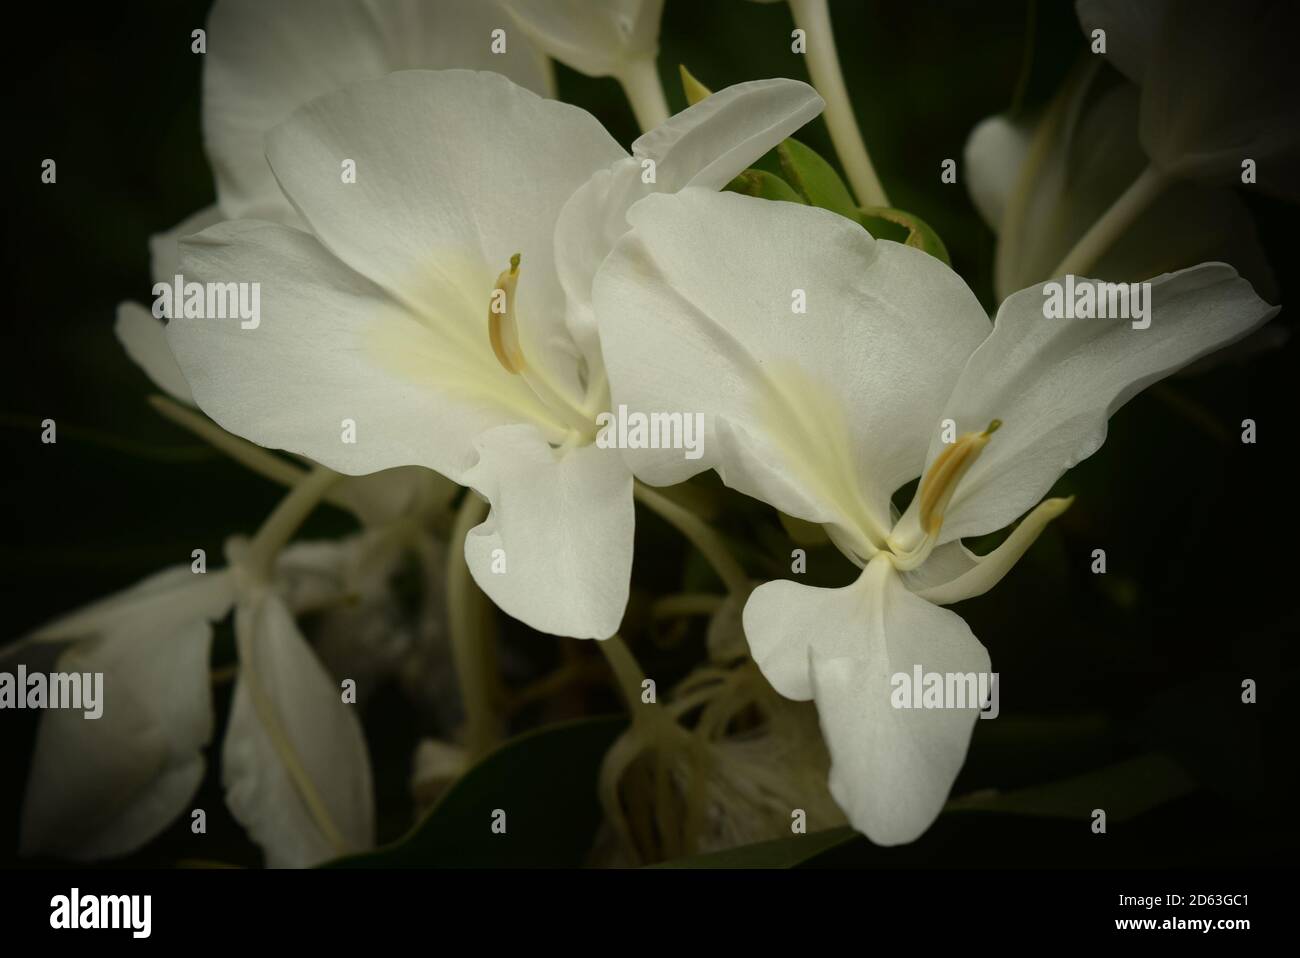 Beautiful white flowers in a natural cluster against dark background Stock Photo